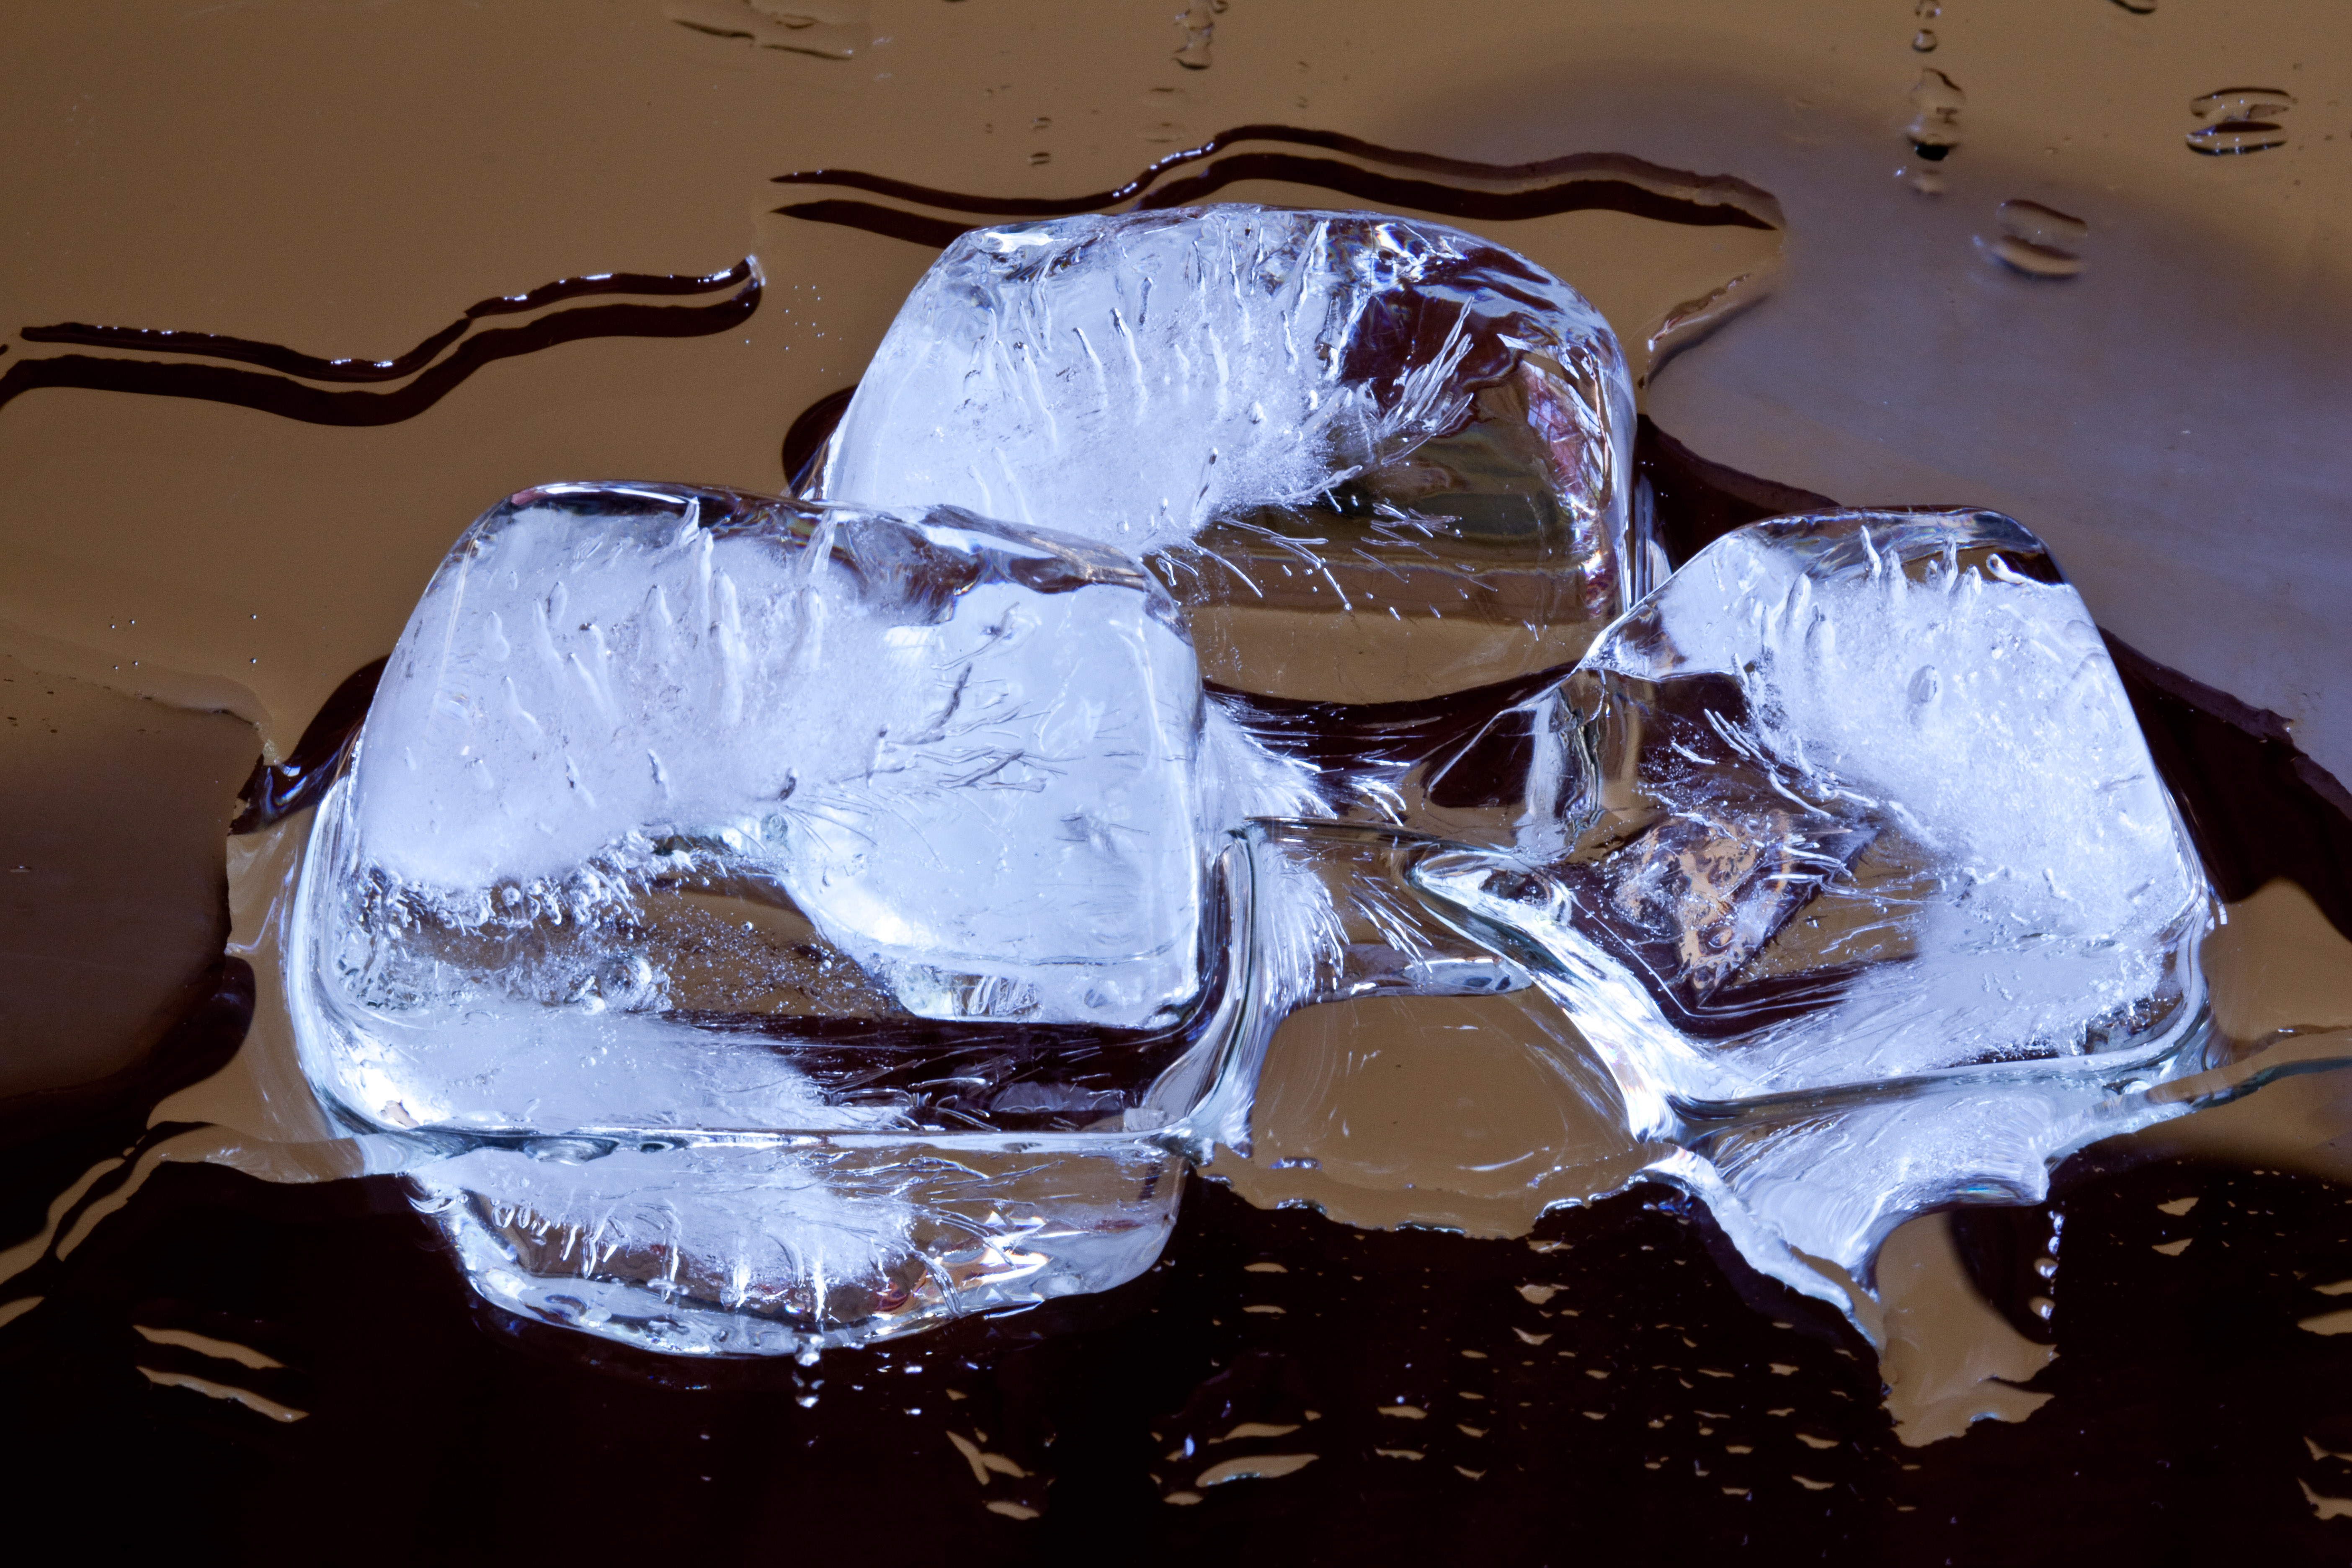 Three melting ice cubes in a puddle of water on a mirrored surface.